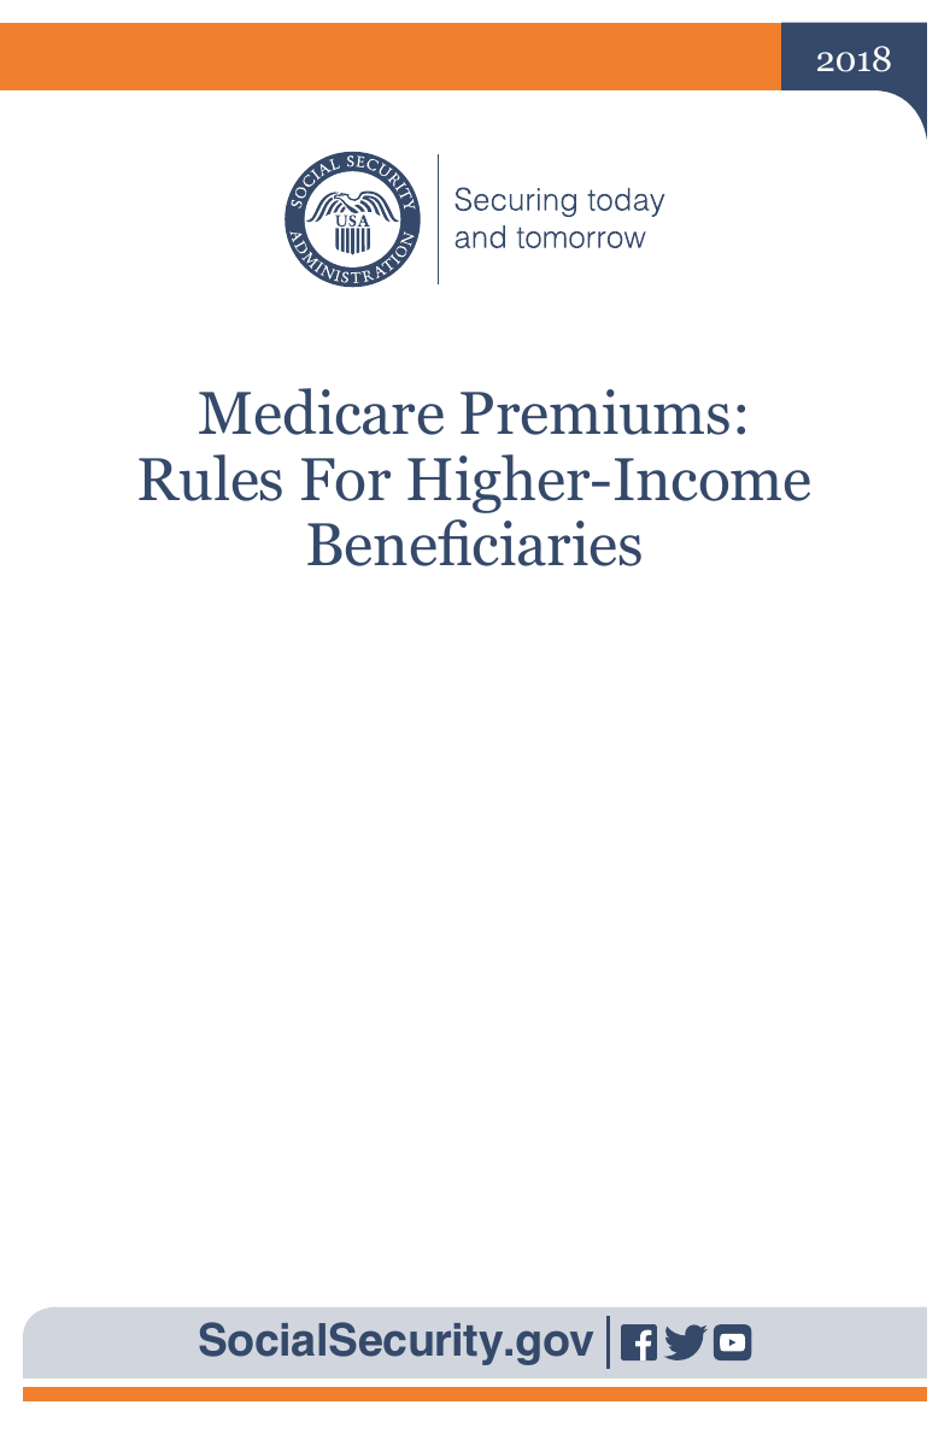 Medicare Premiums: Rules for Higher-Income Beneficiaries, Page 1